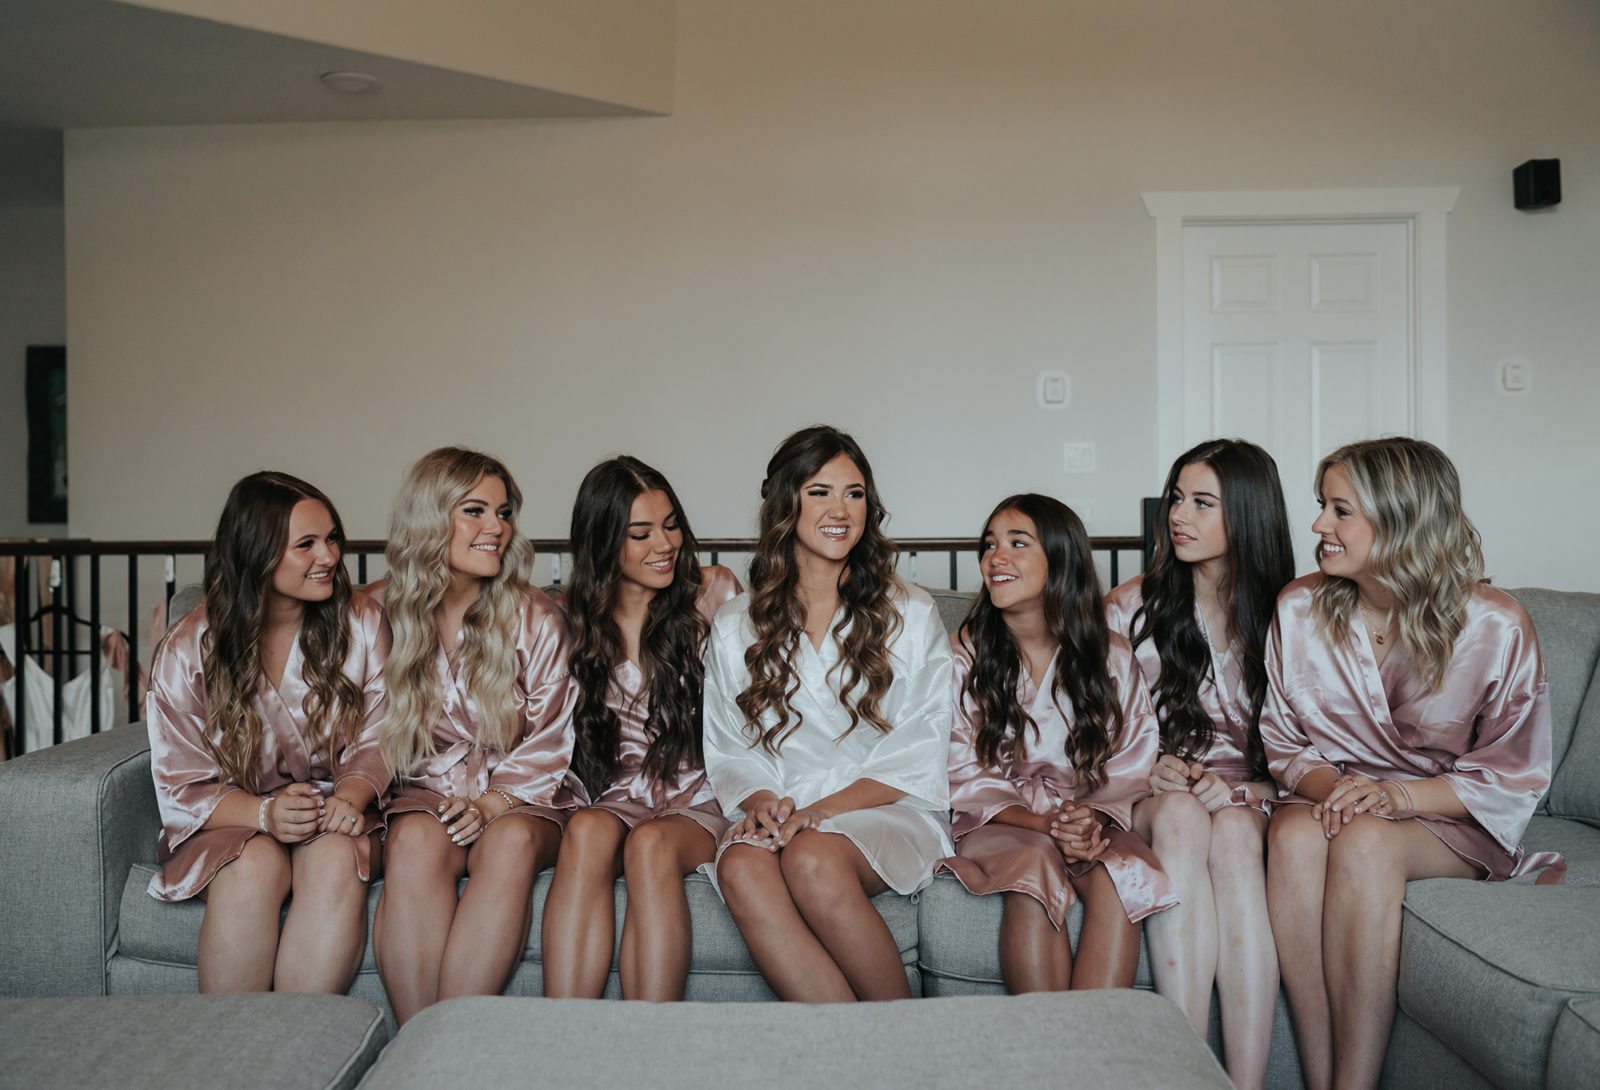 Bride and bridesmaids get ready for wedding day, bride tribe in matching robes